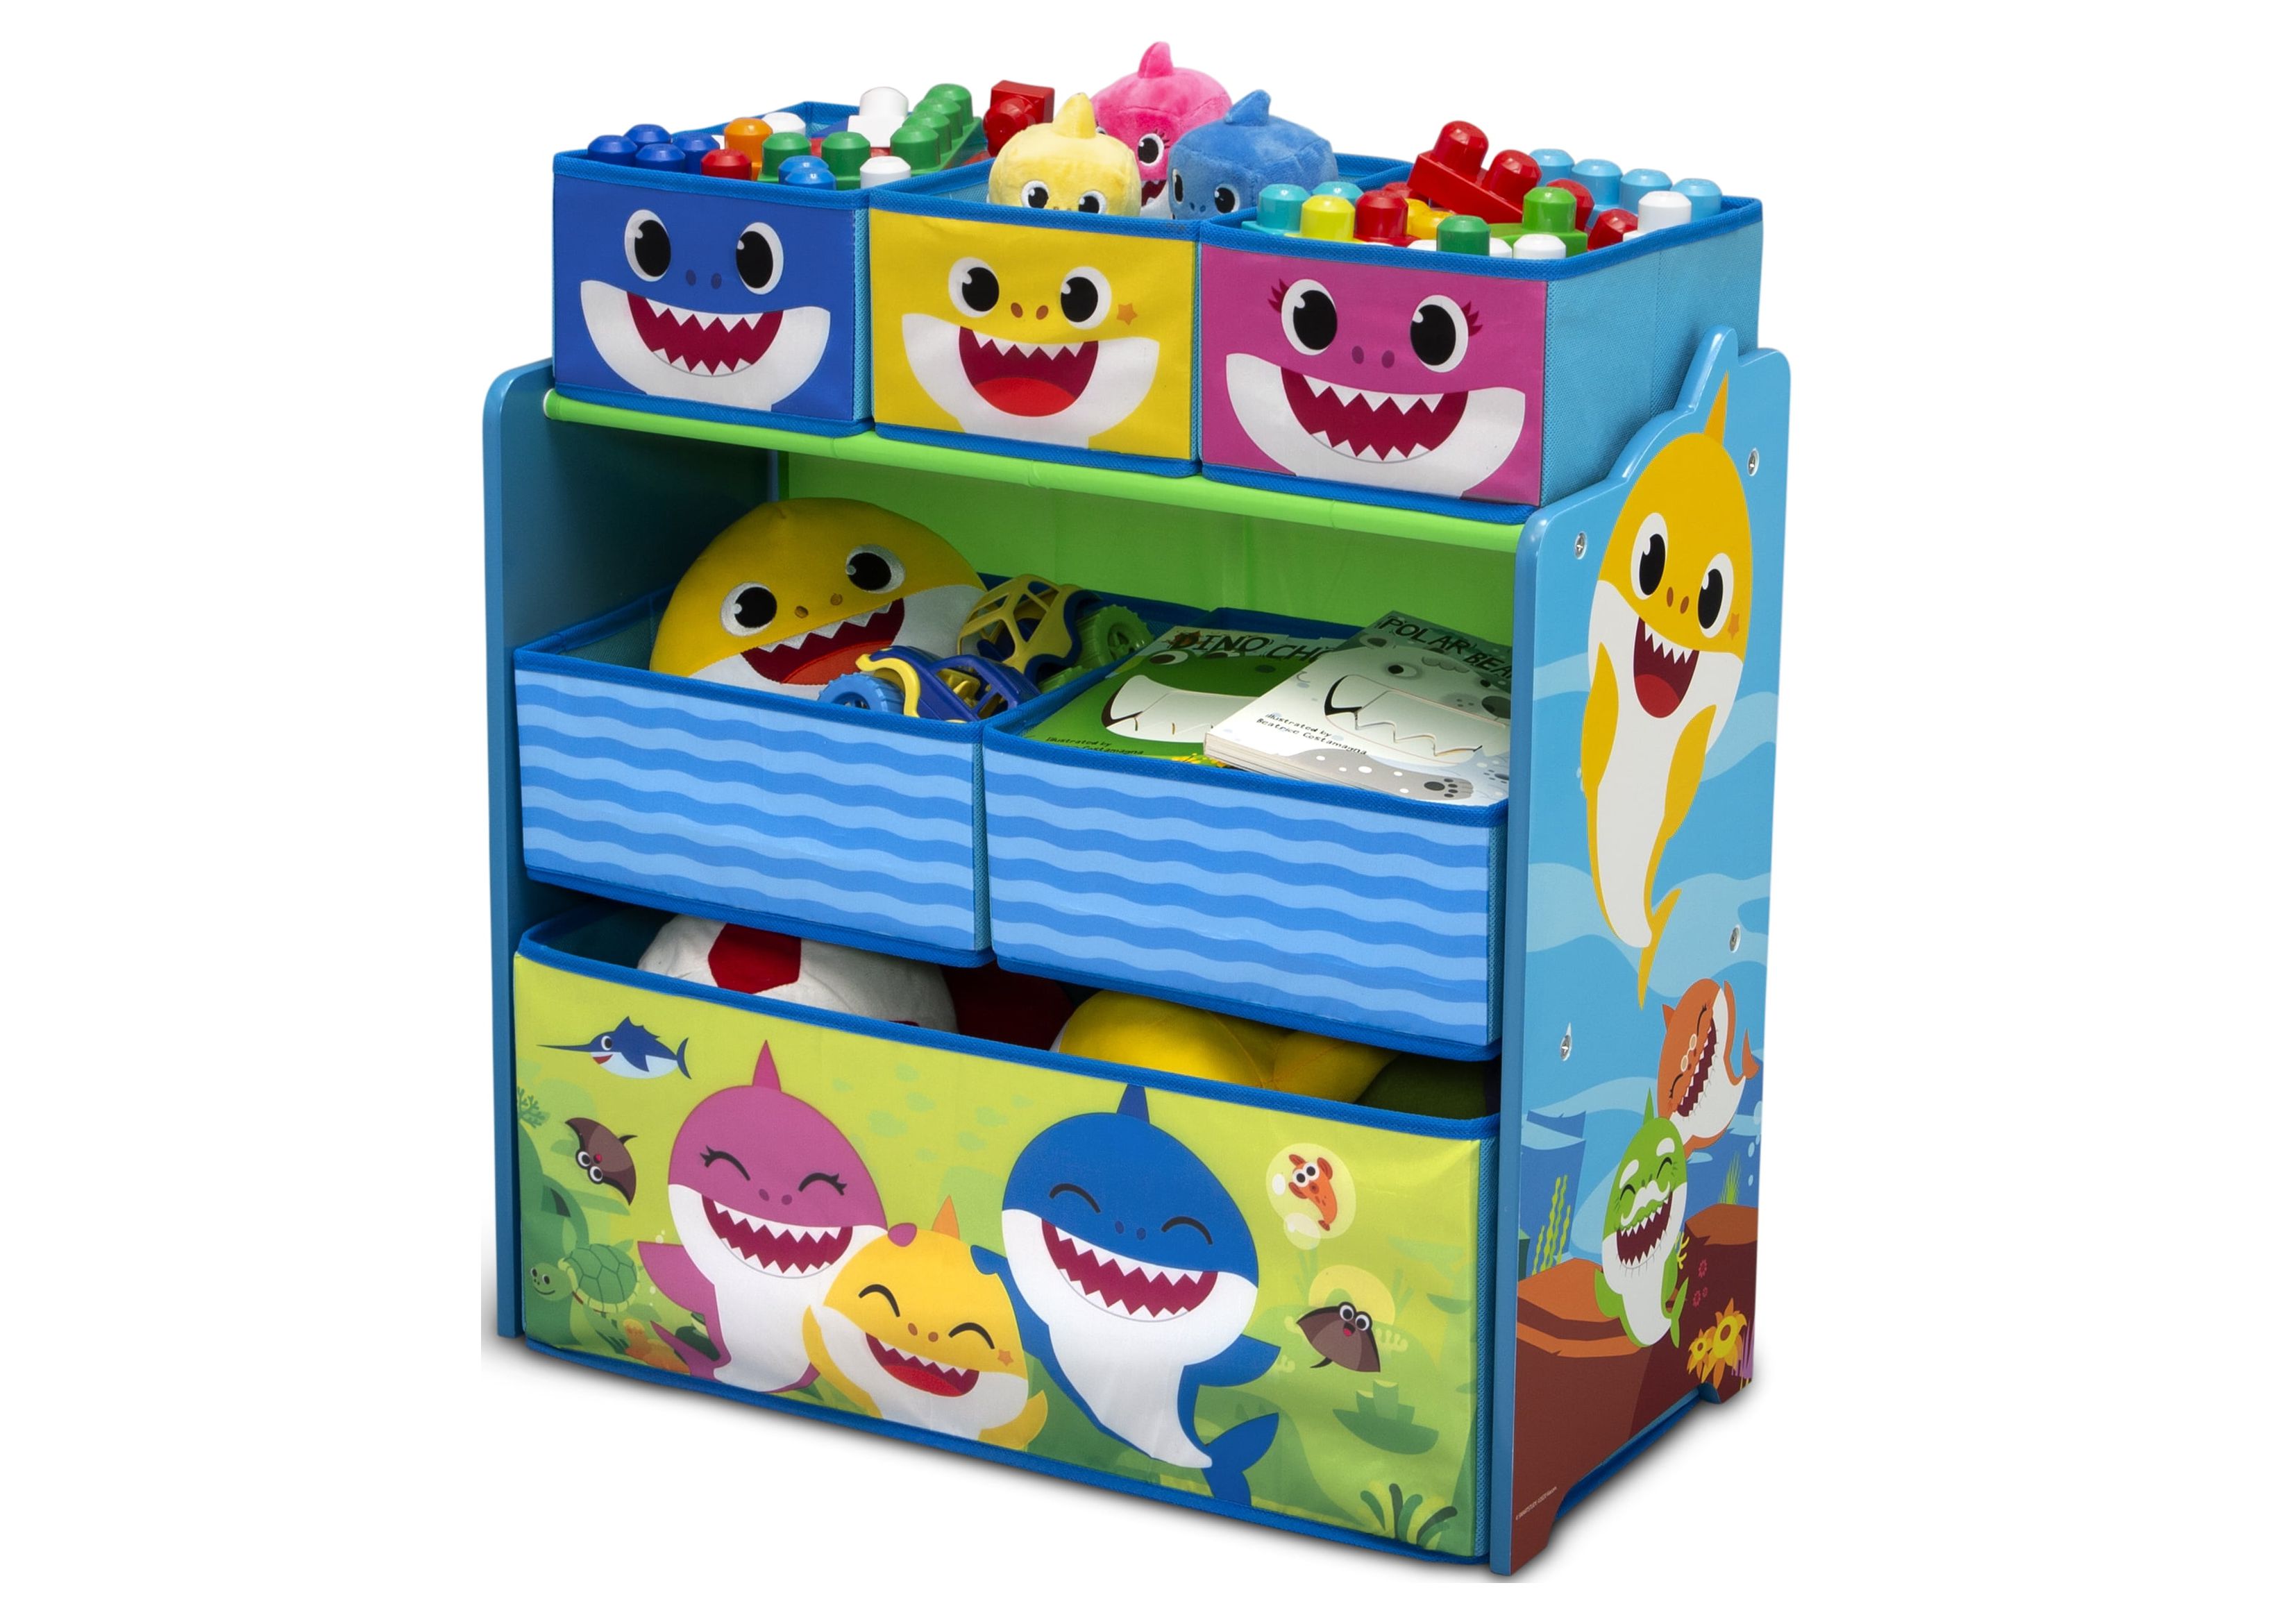 Baby Shark 4-Piece Room-in-a-Box Bedroom Set by Delta Children - Includes Sleep & Play Toddler Bed, 6 Bin Design & Store Toy Organizer and Art Desk with Chair - image 3 of 19